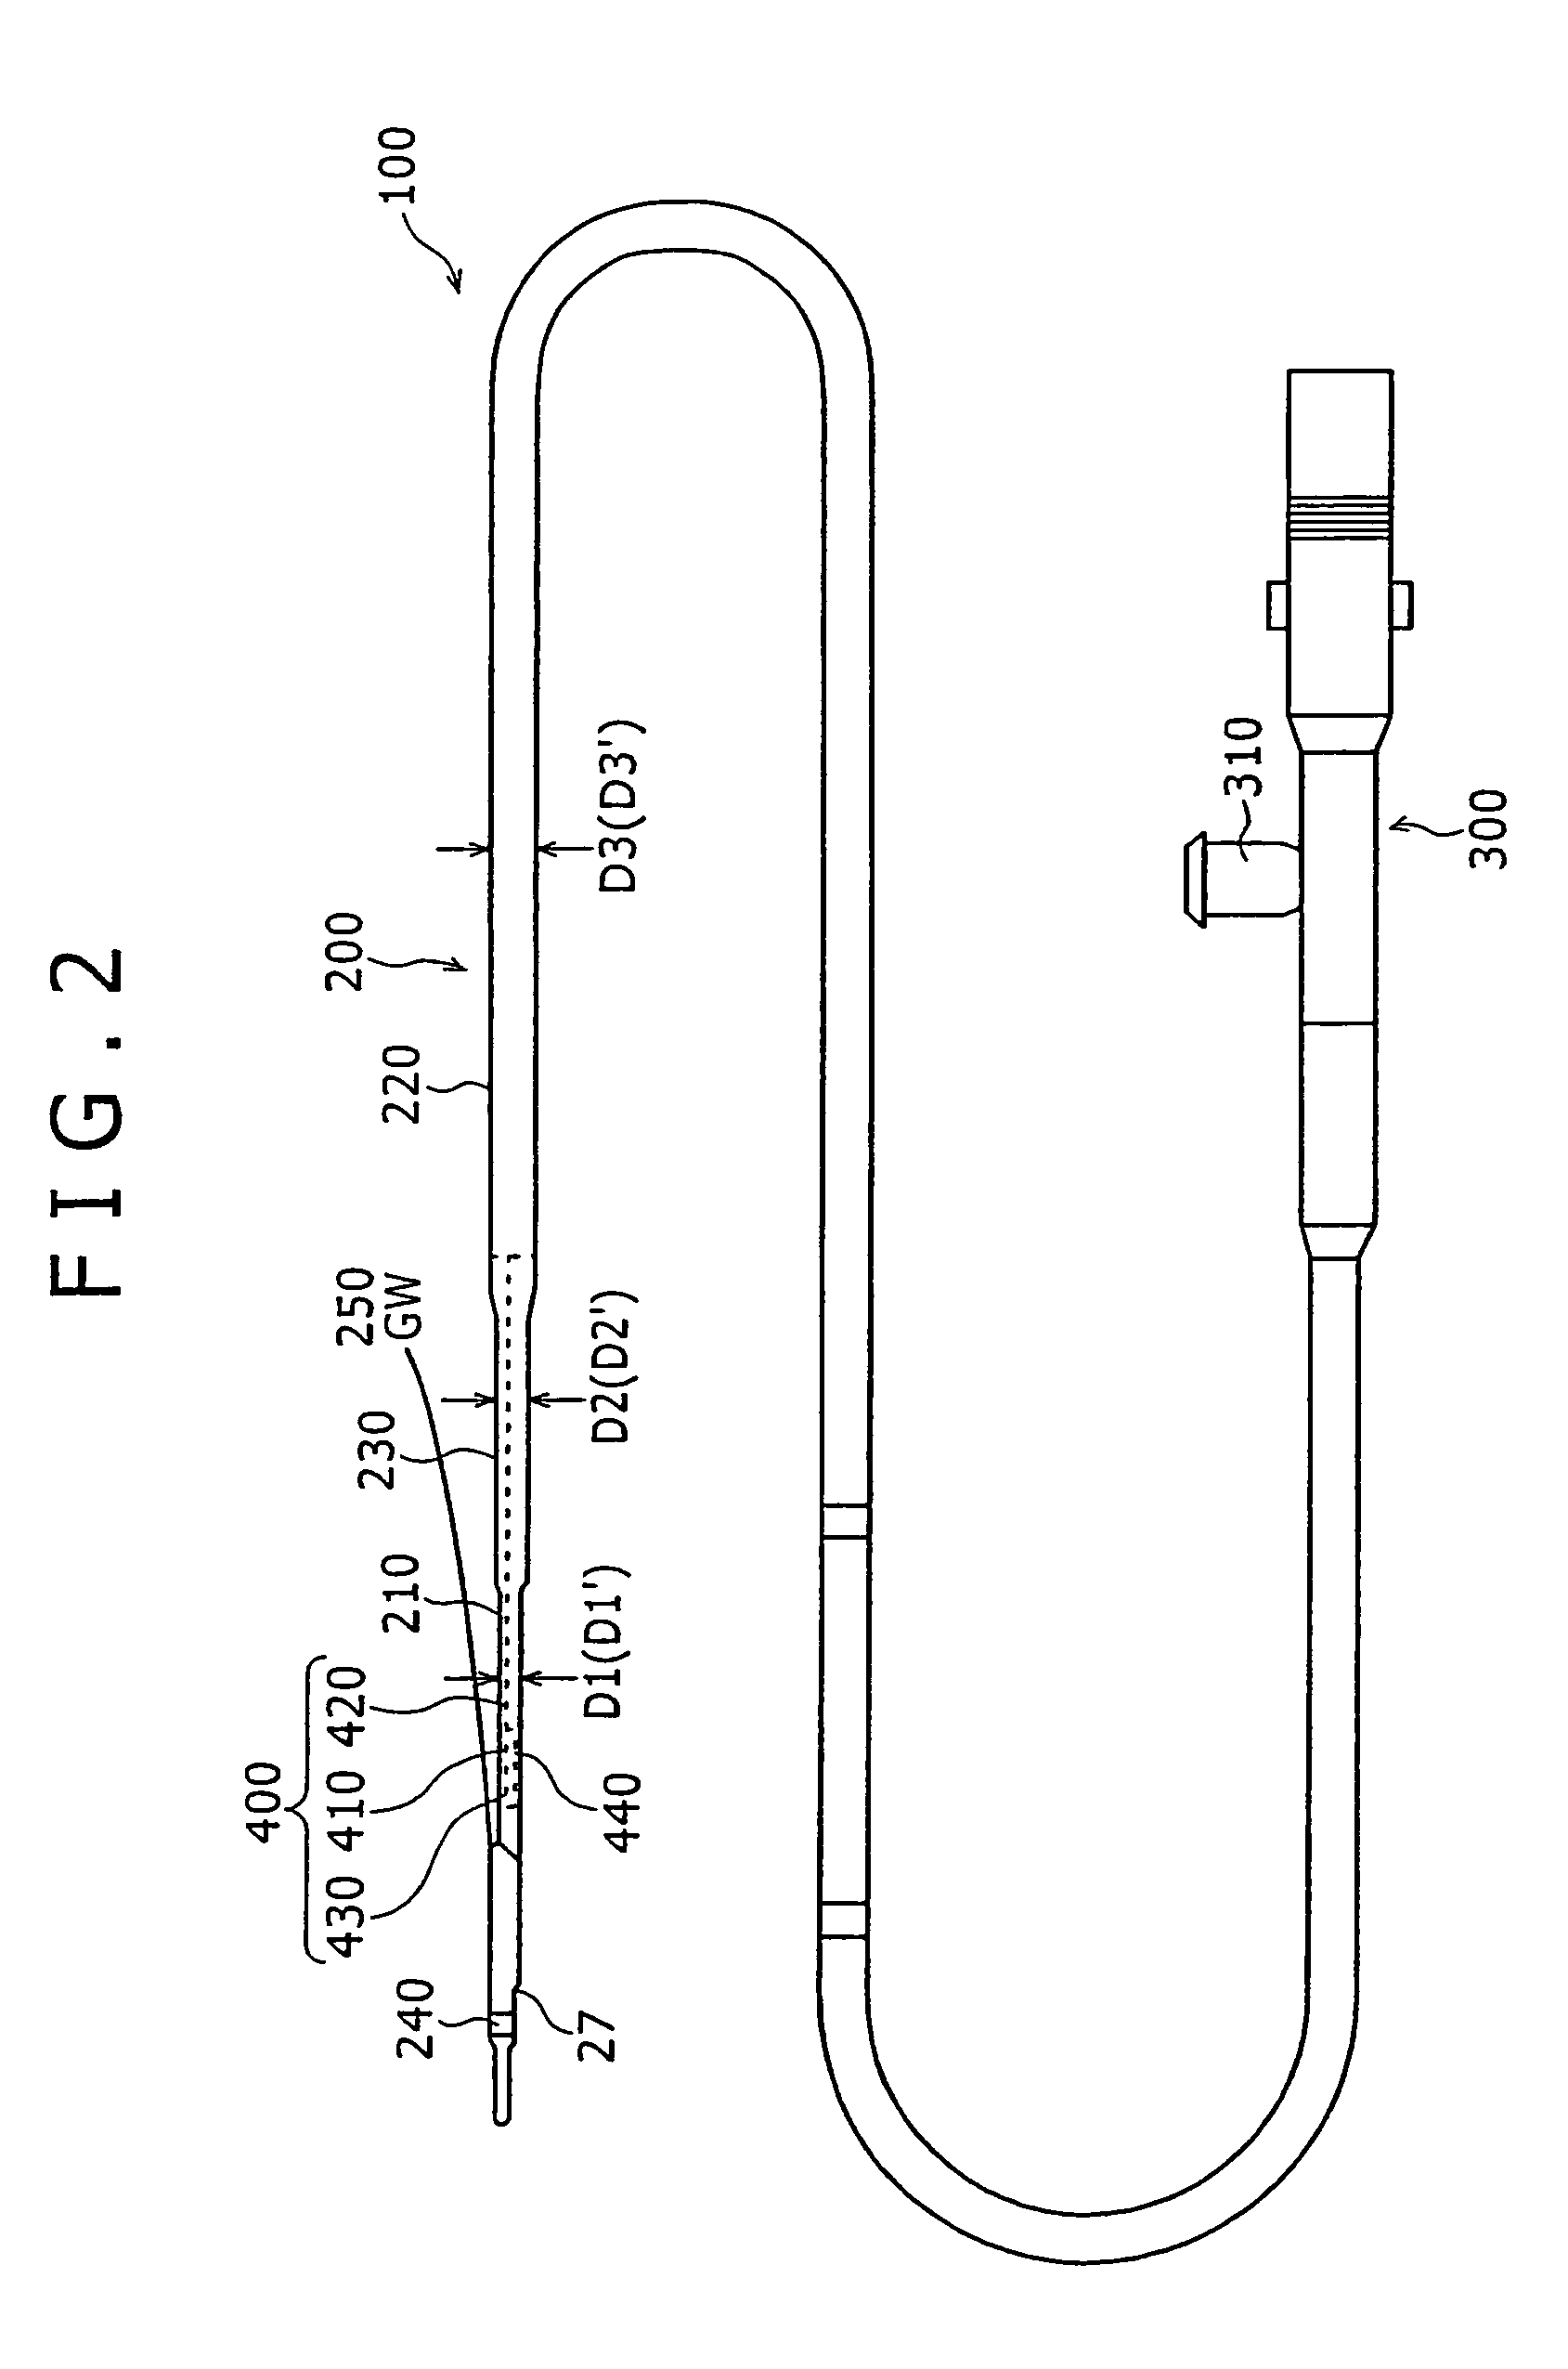 Ultrasonic imaging system and imaging method